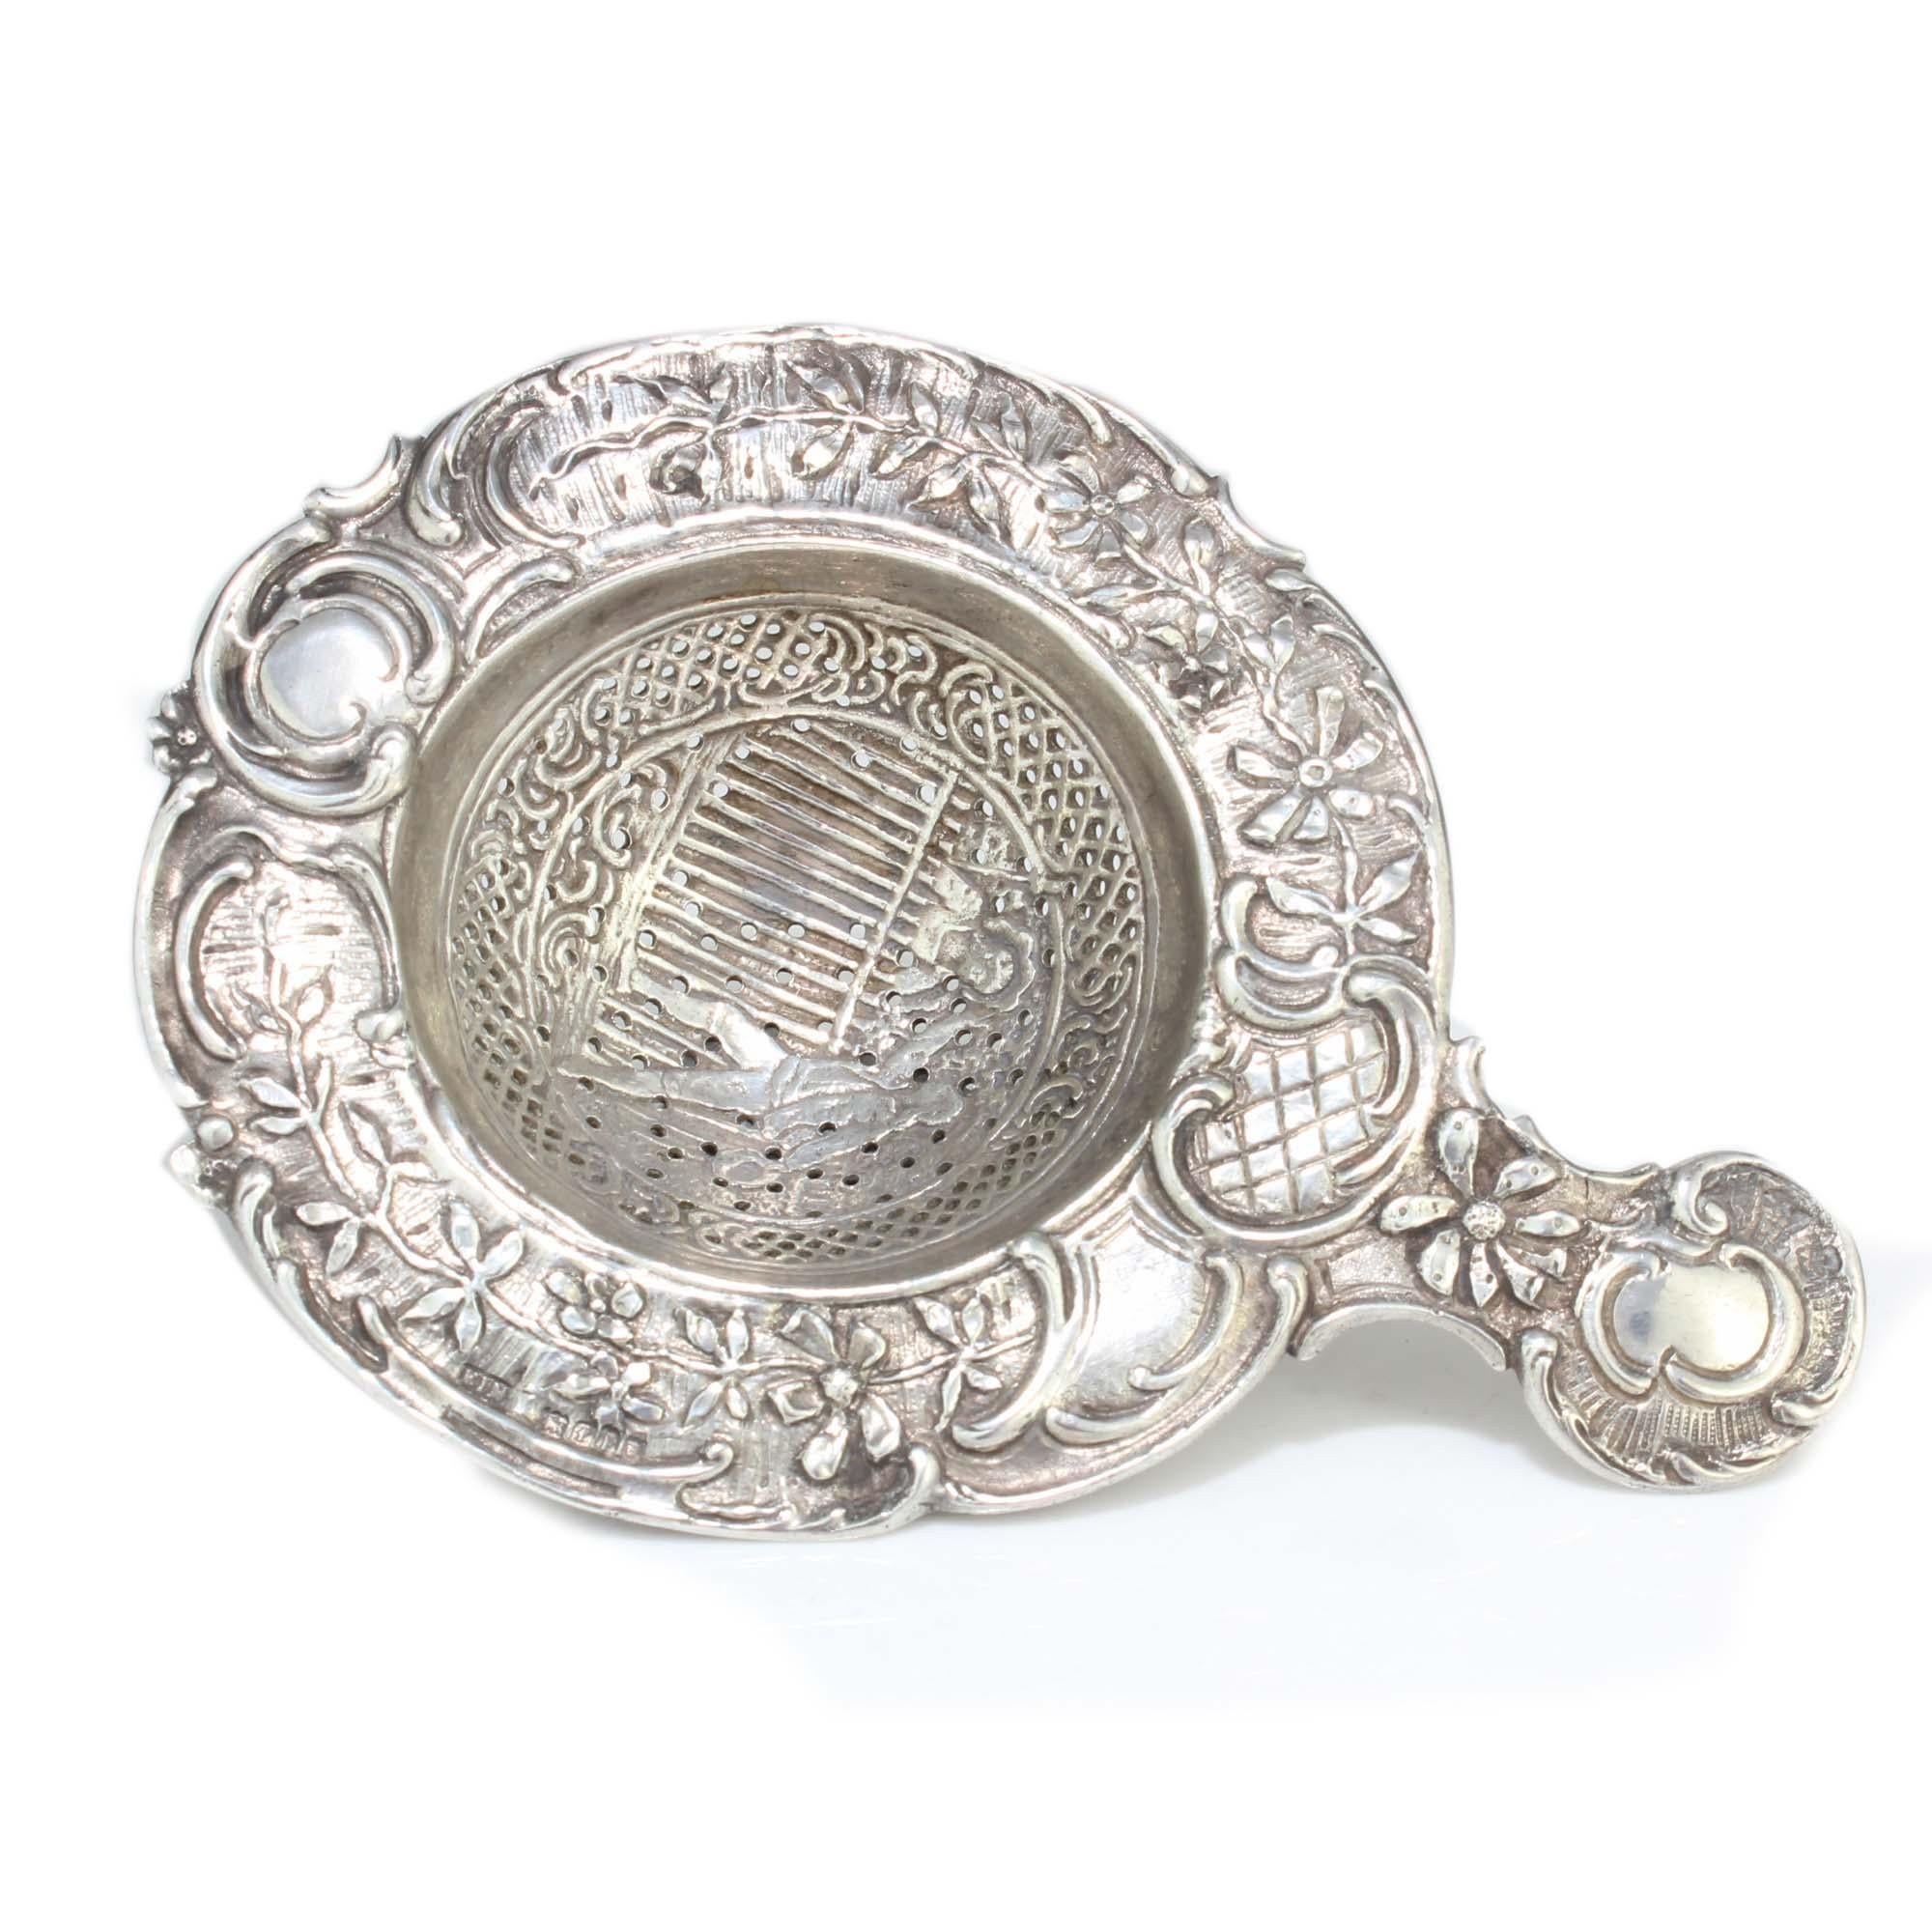 Antique silver tea strainer decorated with lady and gentleman, scrolls and flower garlands.
 
 Maker: Friedrich Reusswig 
 Made in Germany, 20th Century 
 Import marks: Elly Isaac Miller, England, London, 1901
 Fully hallmarked.

 Dimensions